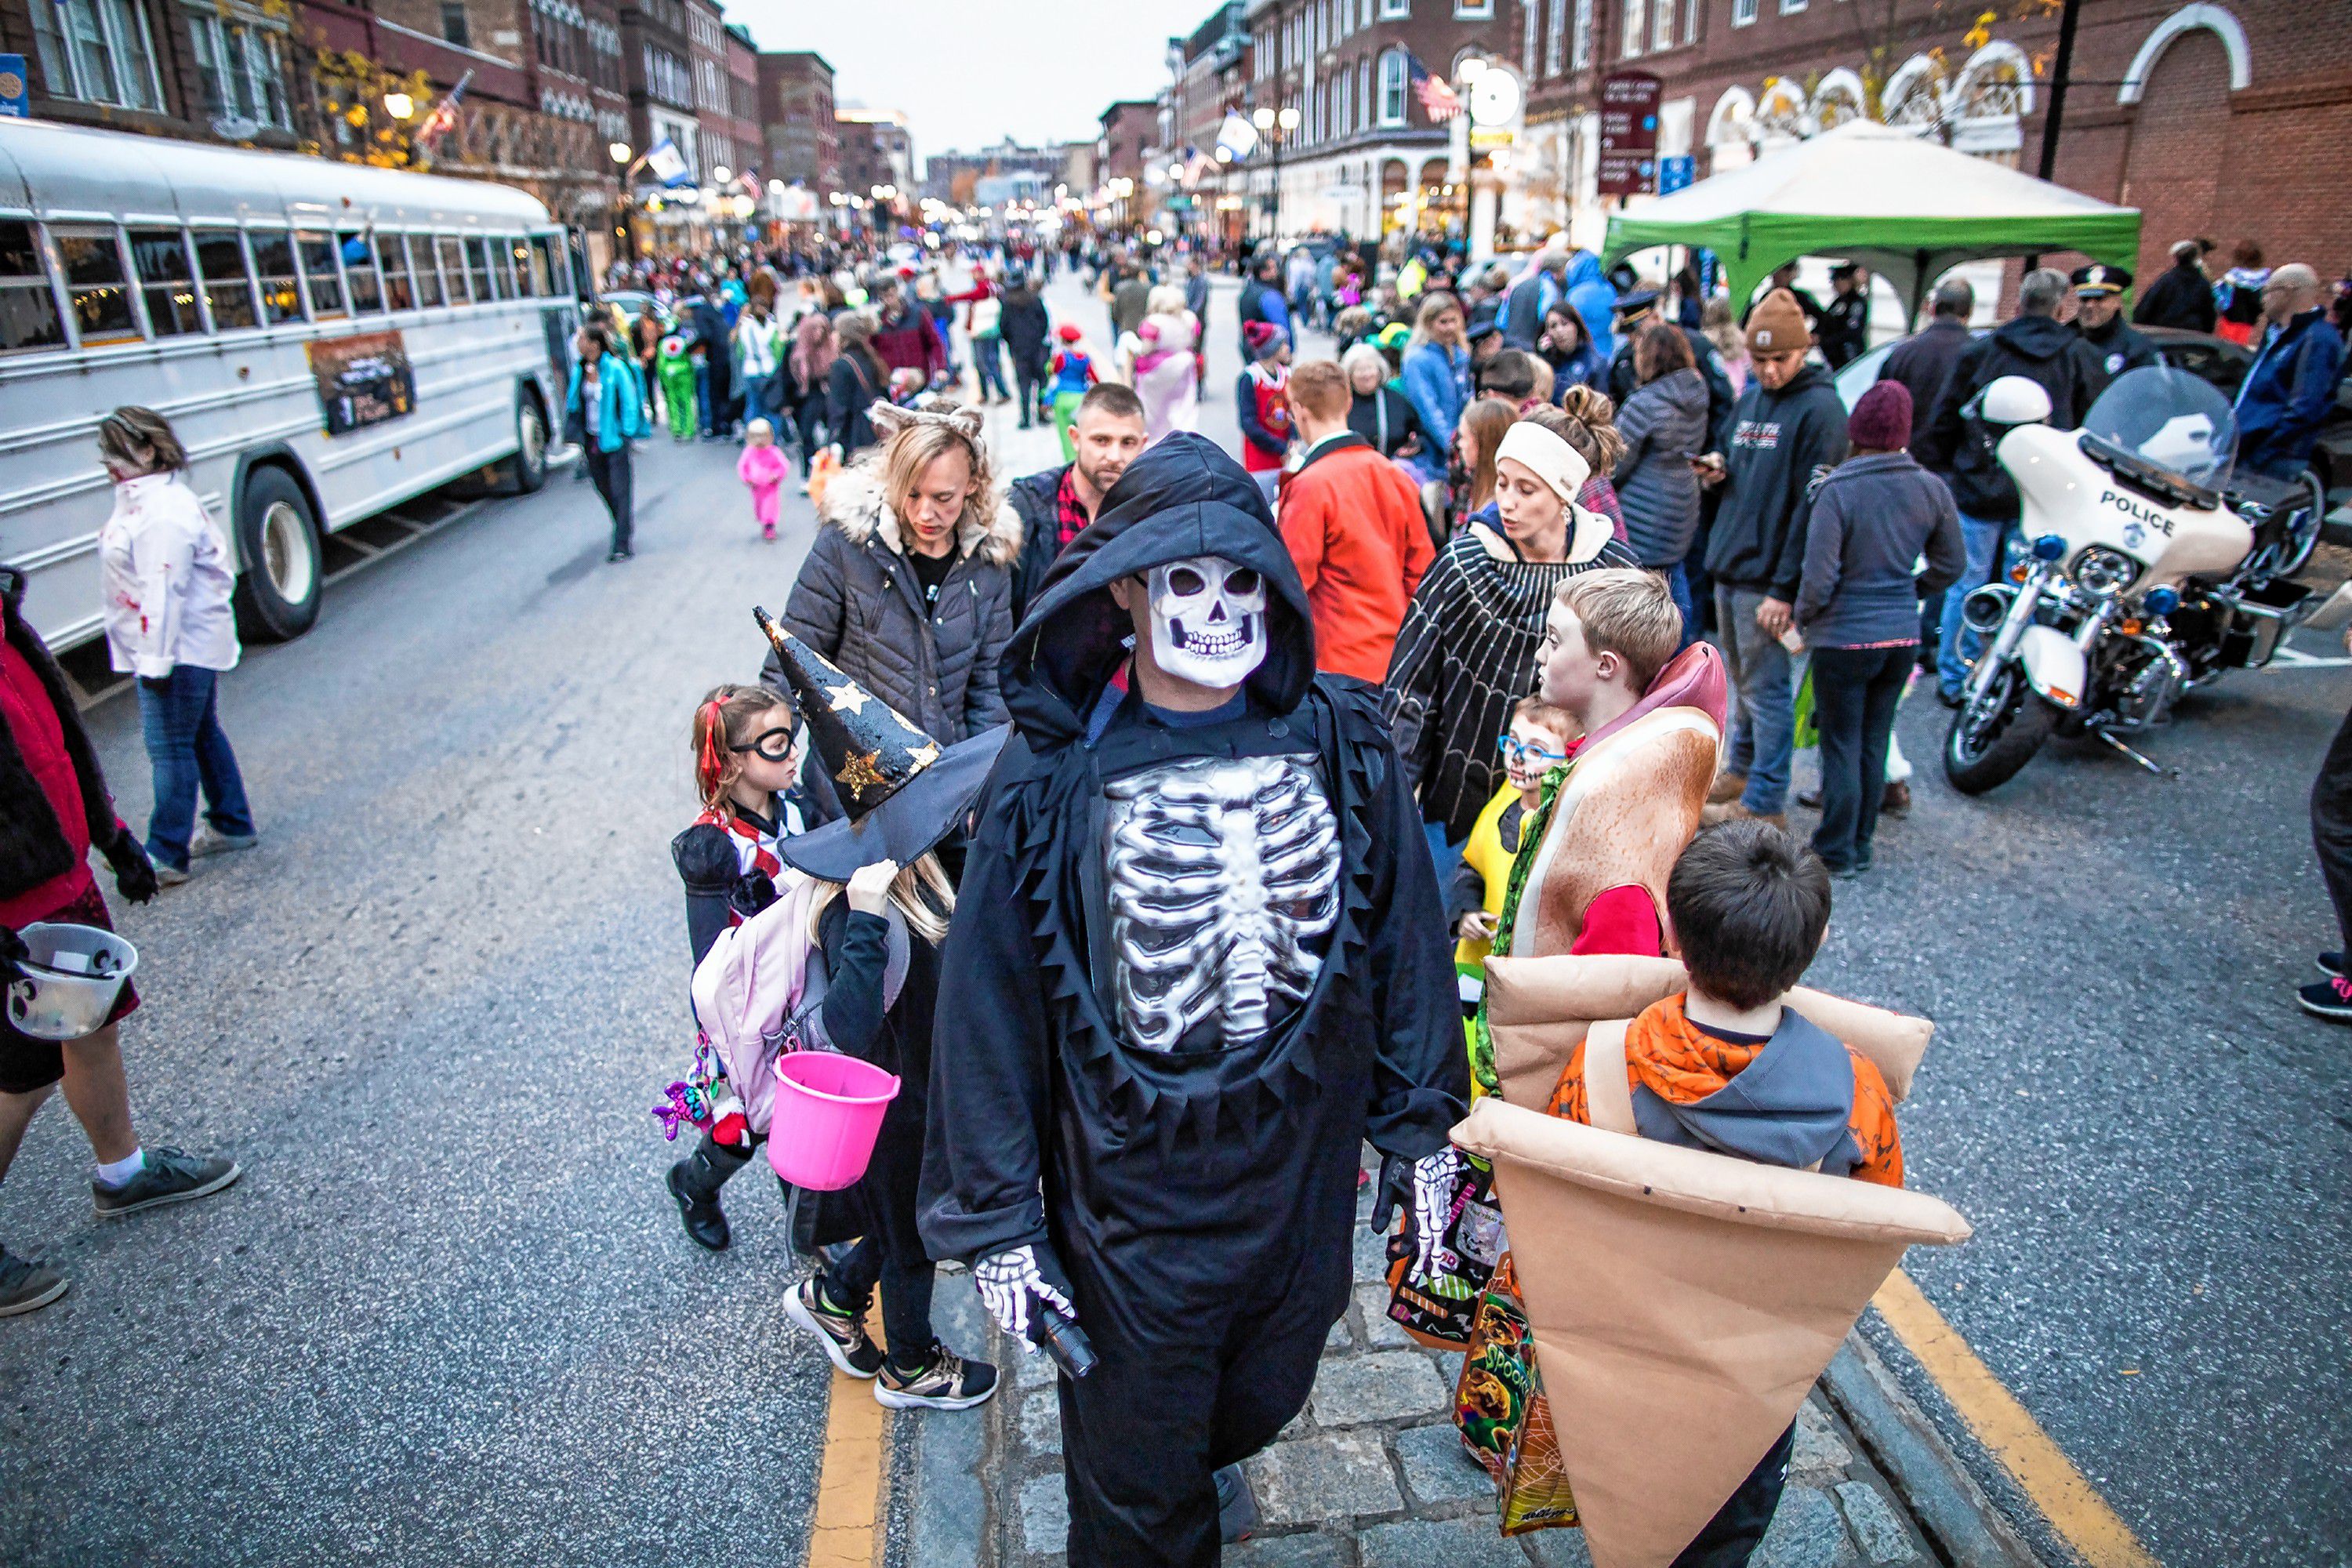 The crowd at Halloween Howl on Main Street in downtown Concord on